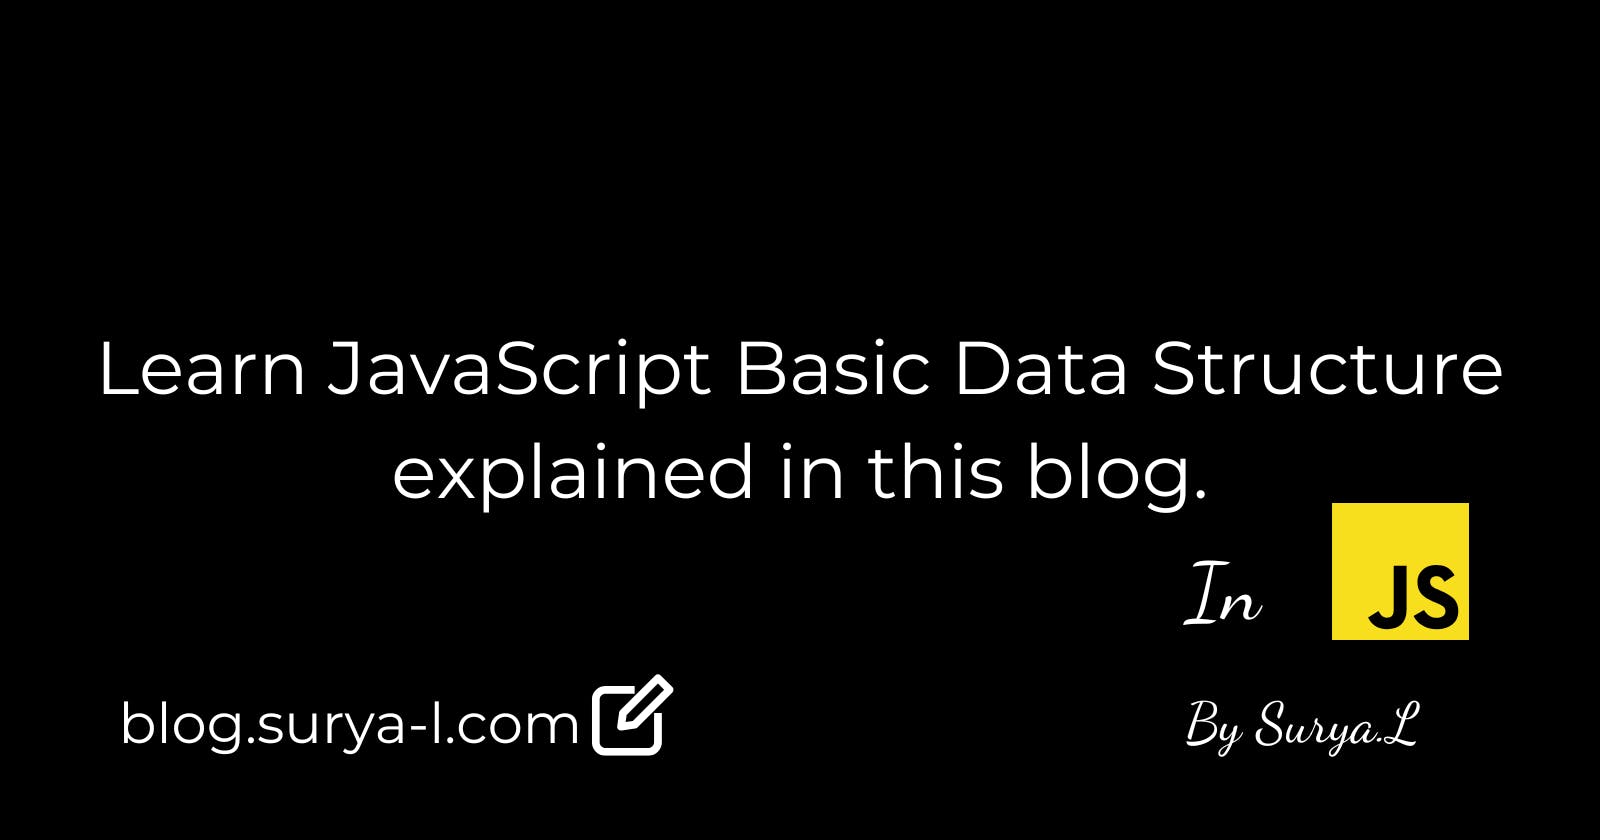 Learn JavaScript Basic Data Structure explained in this blog.